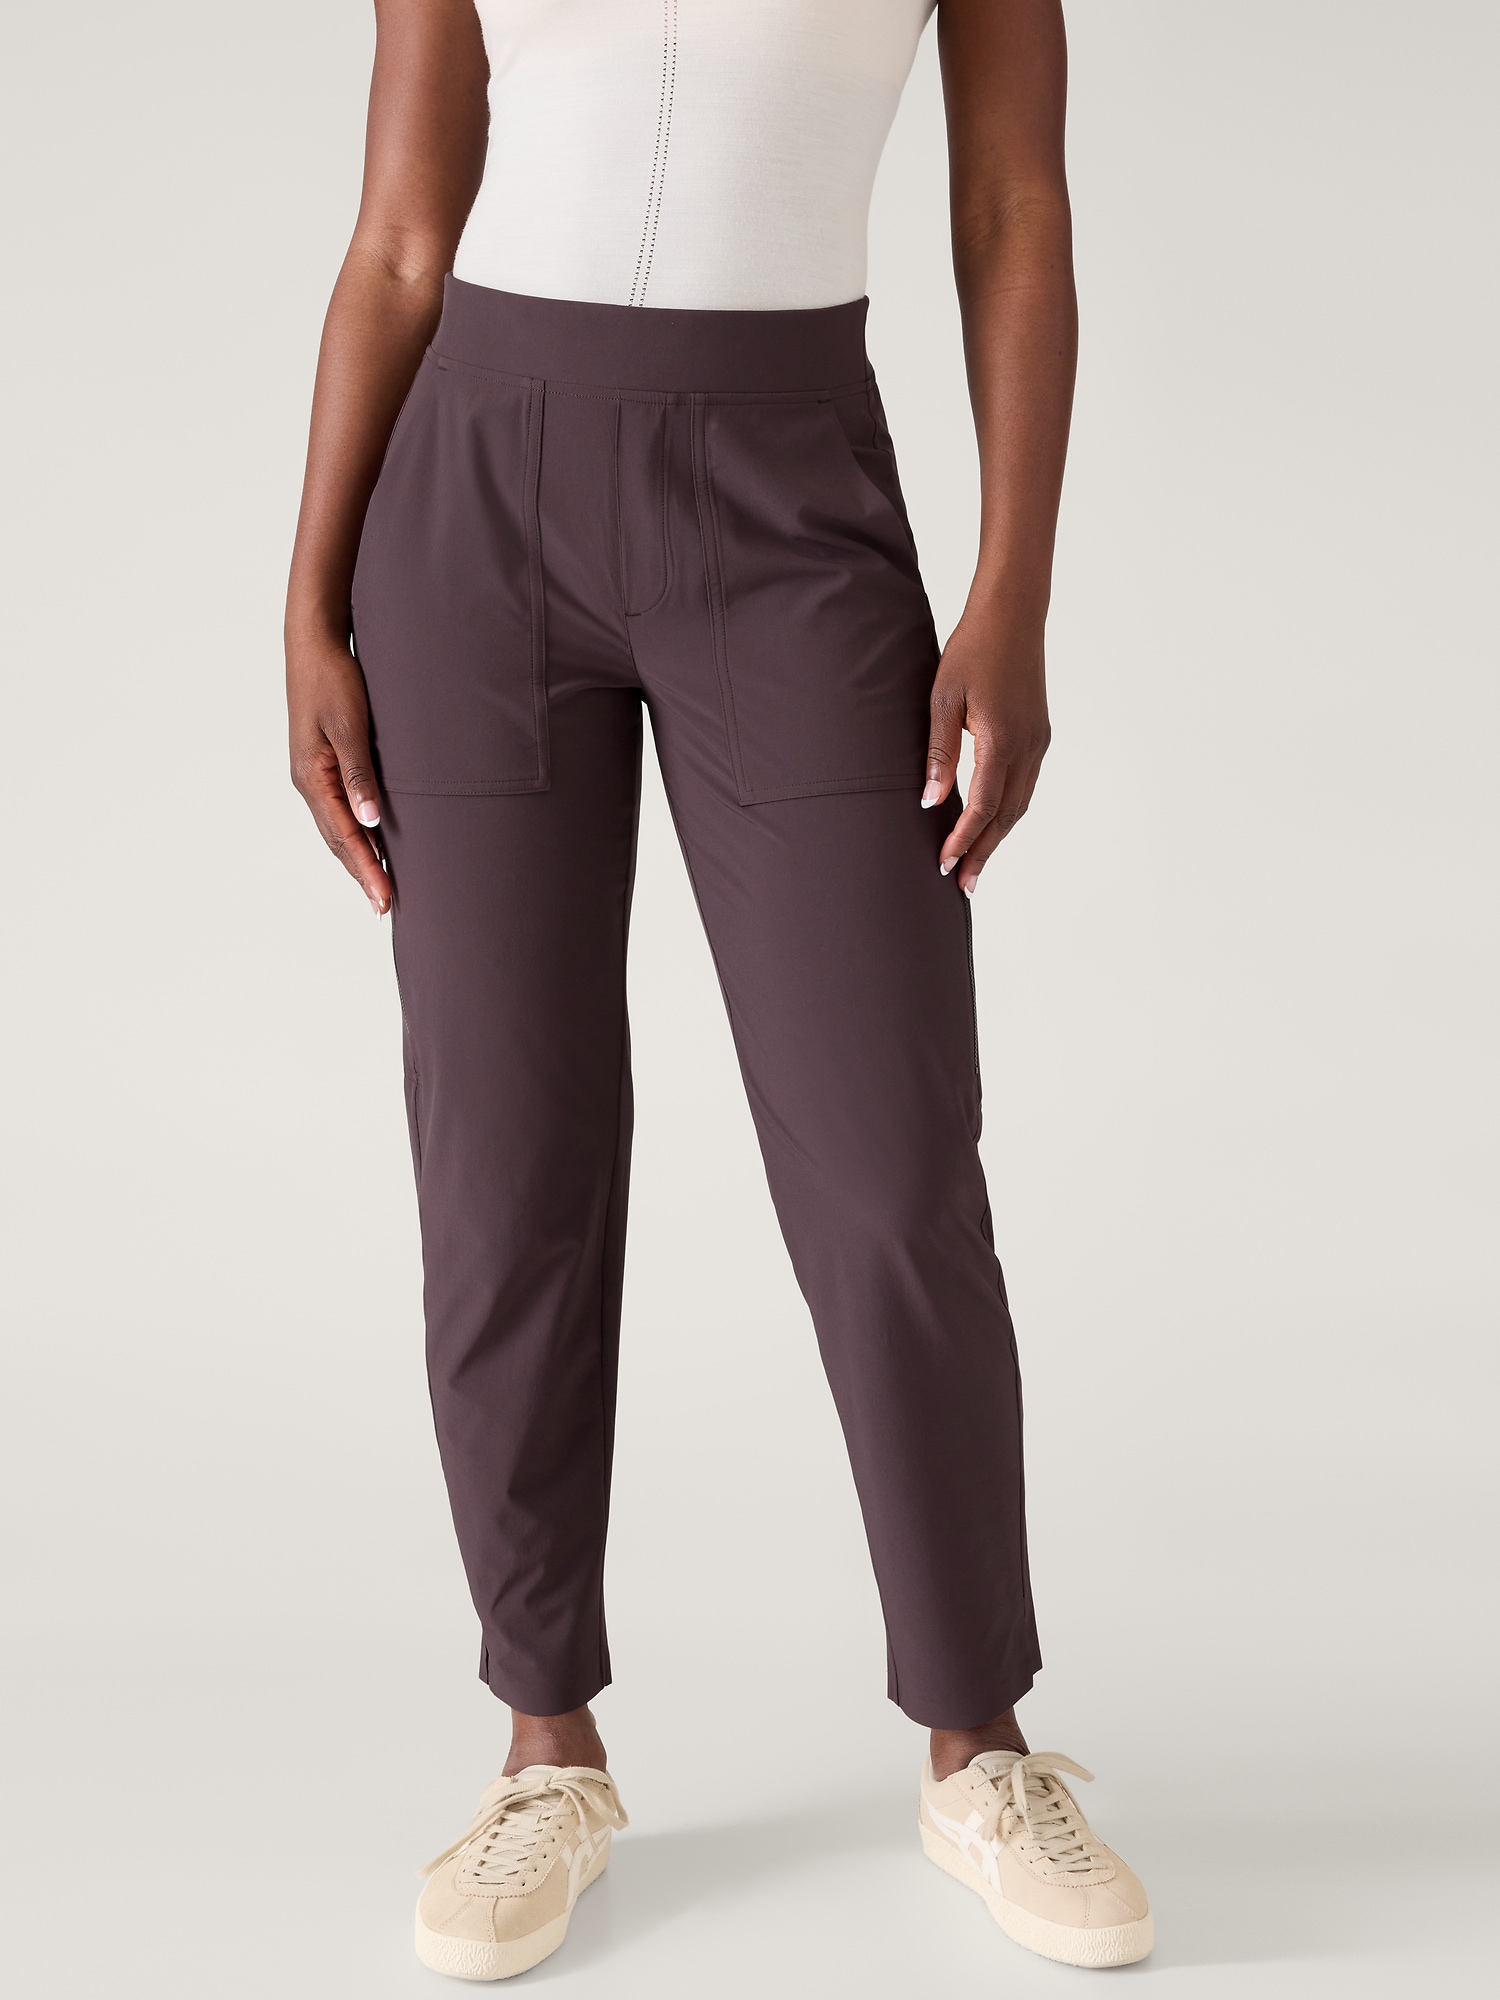 One of the most versatile pants you could ever own and comes in many  colors. The Brooklyn Ankle Pant by @athleta #athletapartner #powerof